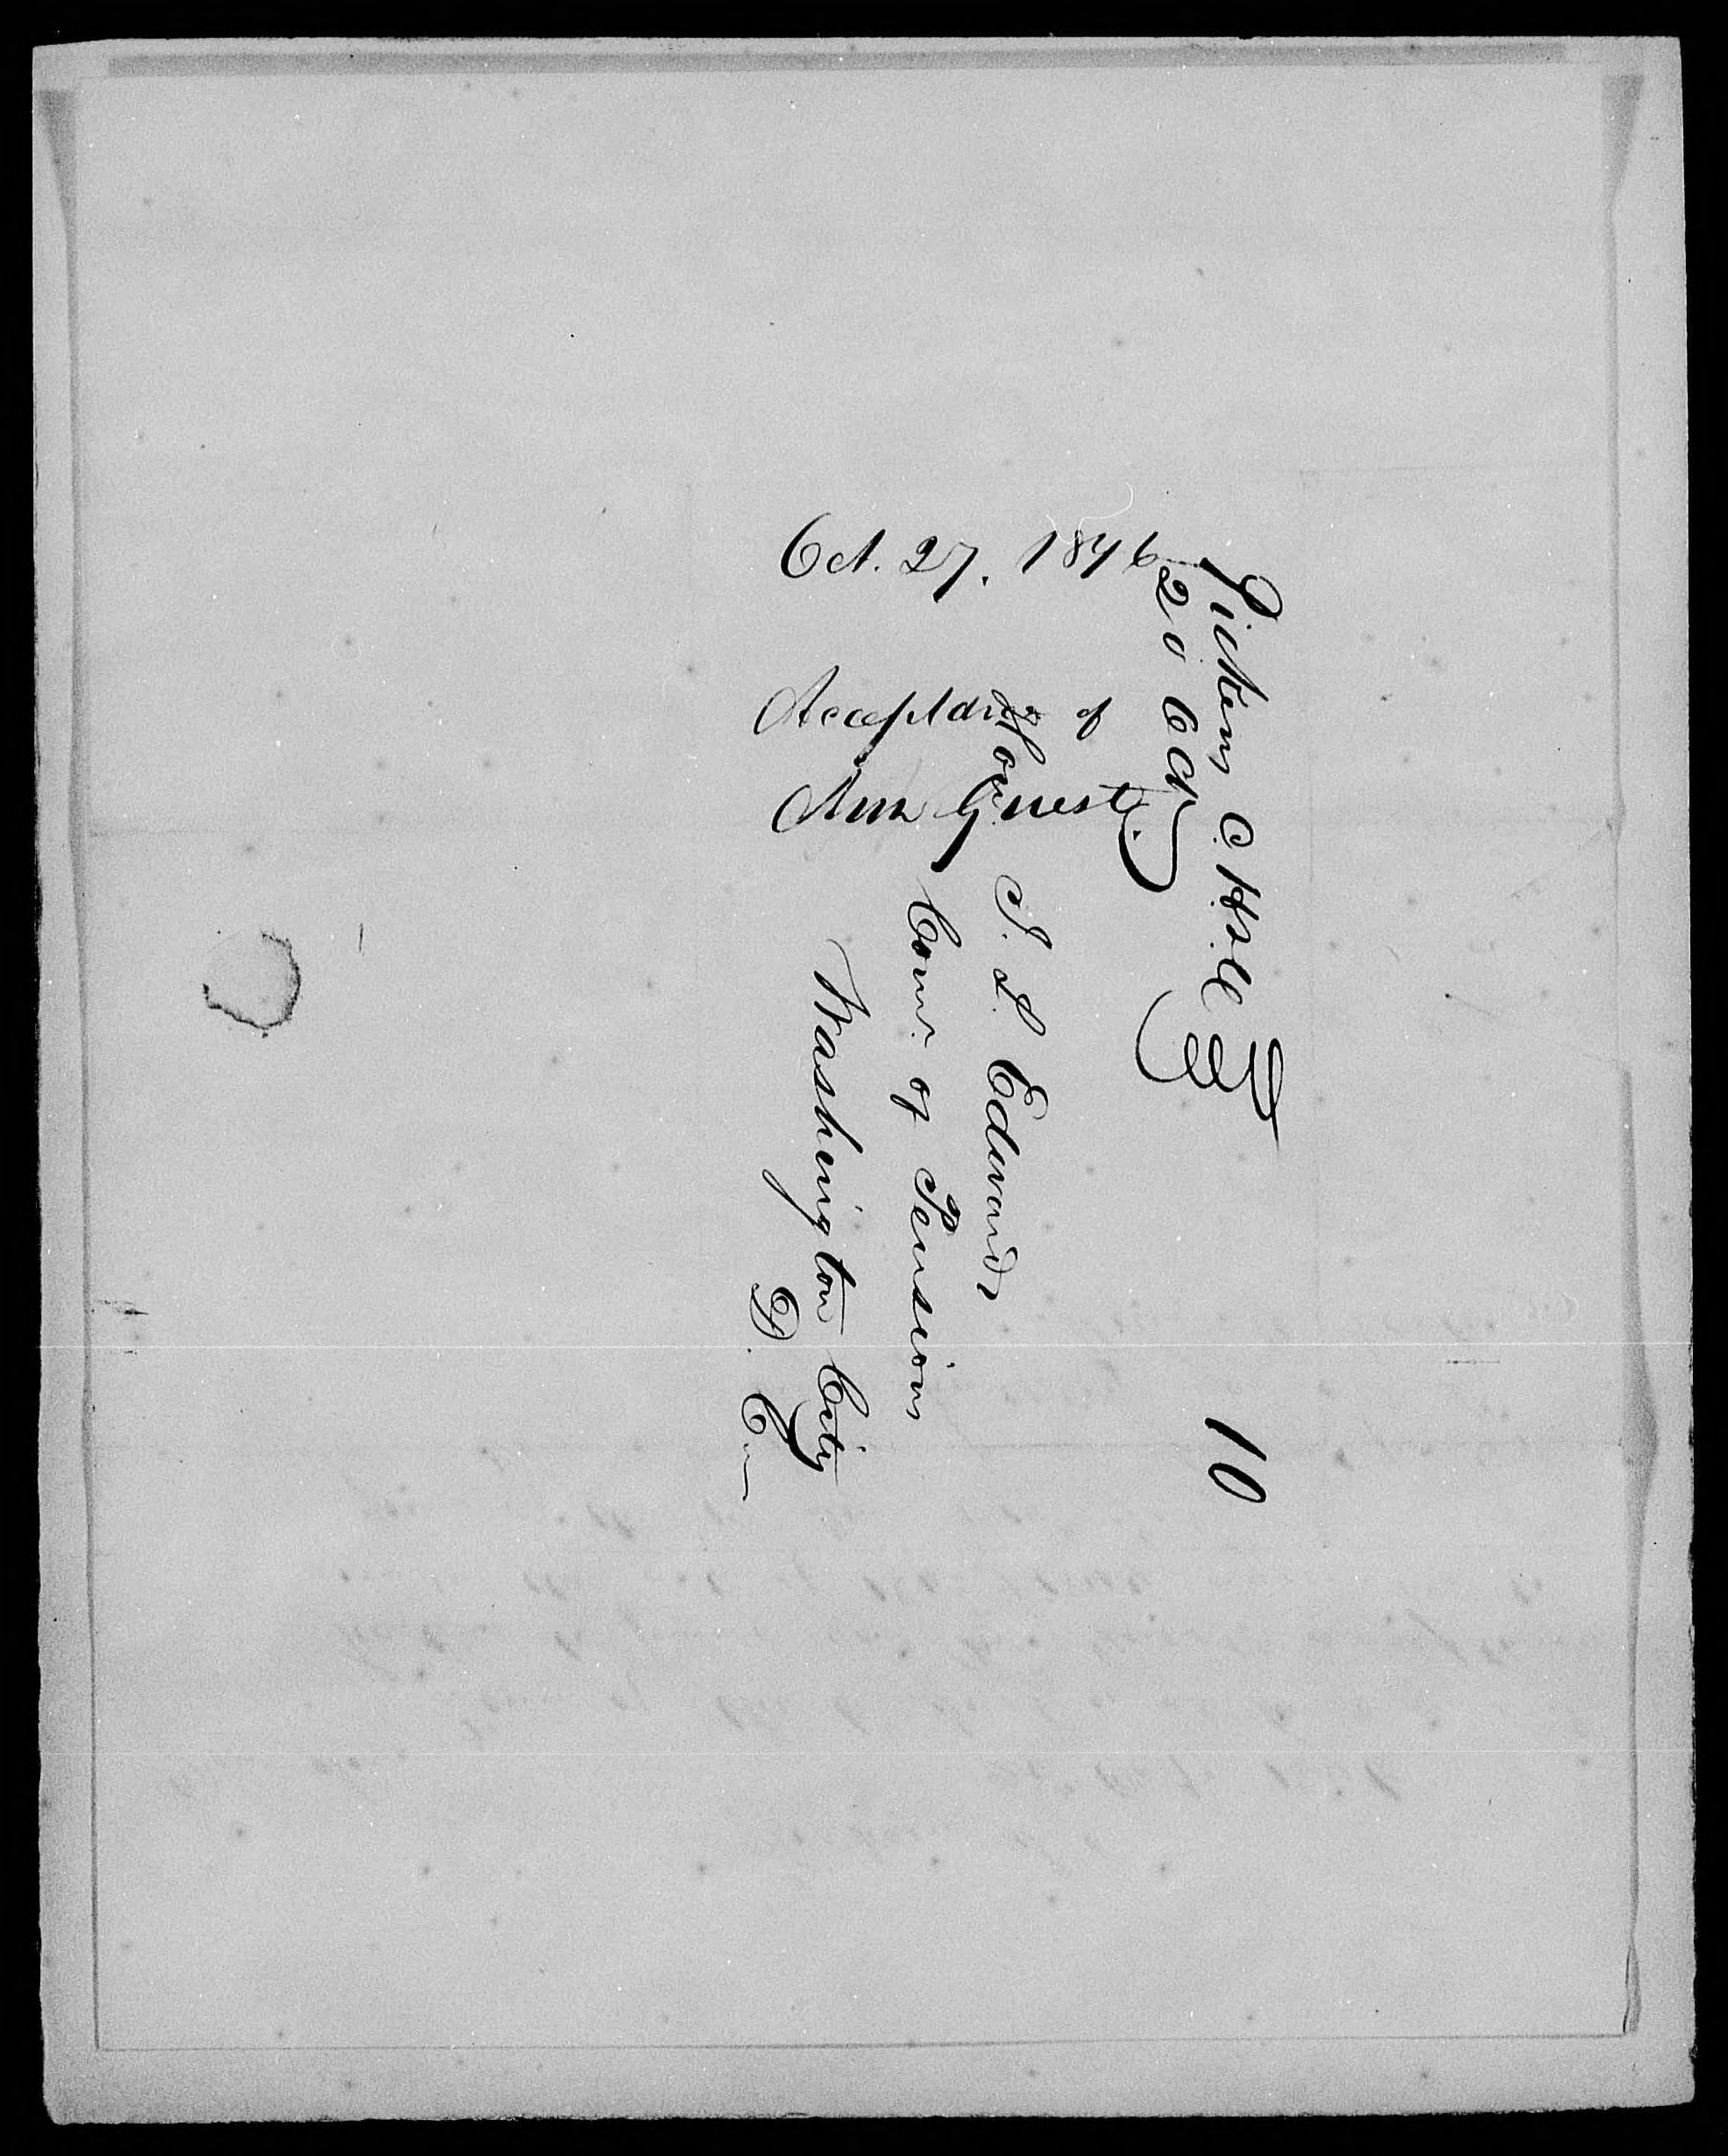 Letter from Miles M. Norton to James L. Edwards, 20 October 1846, page 2